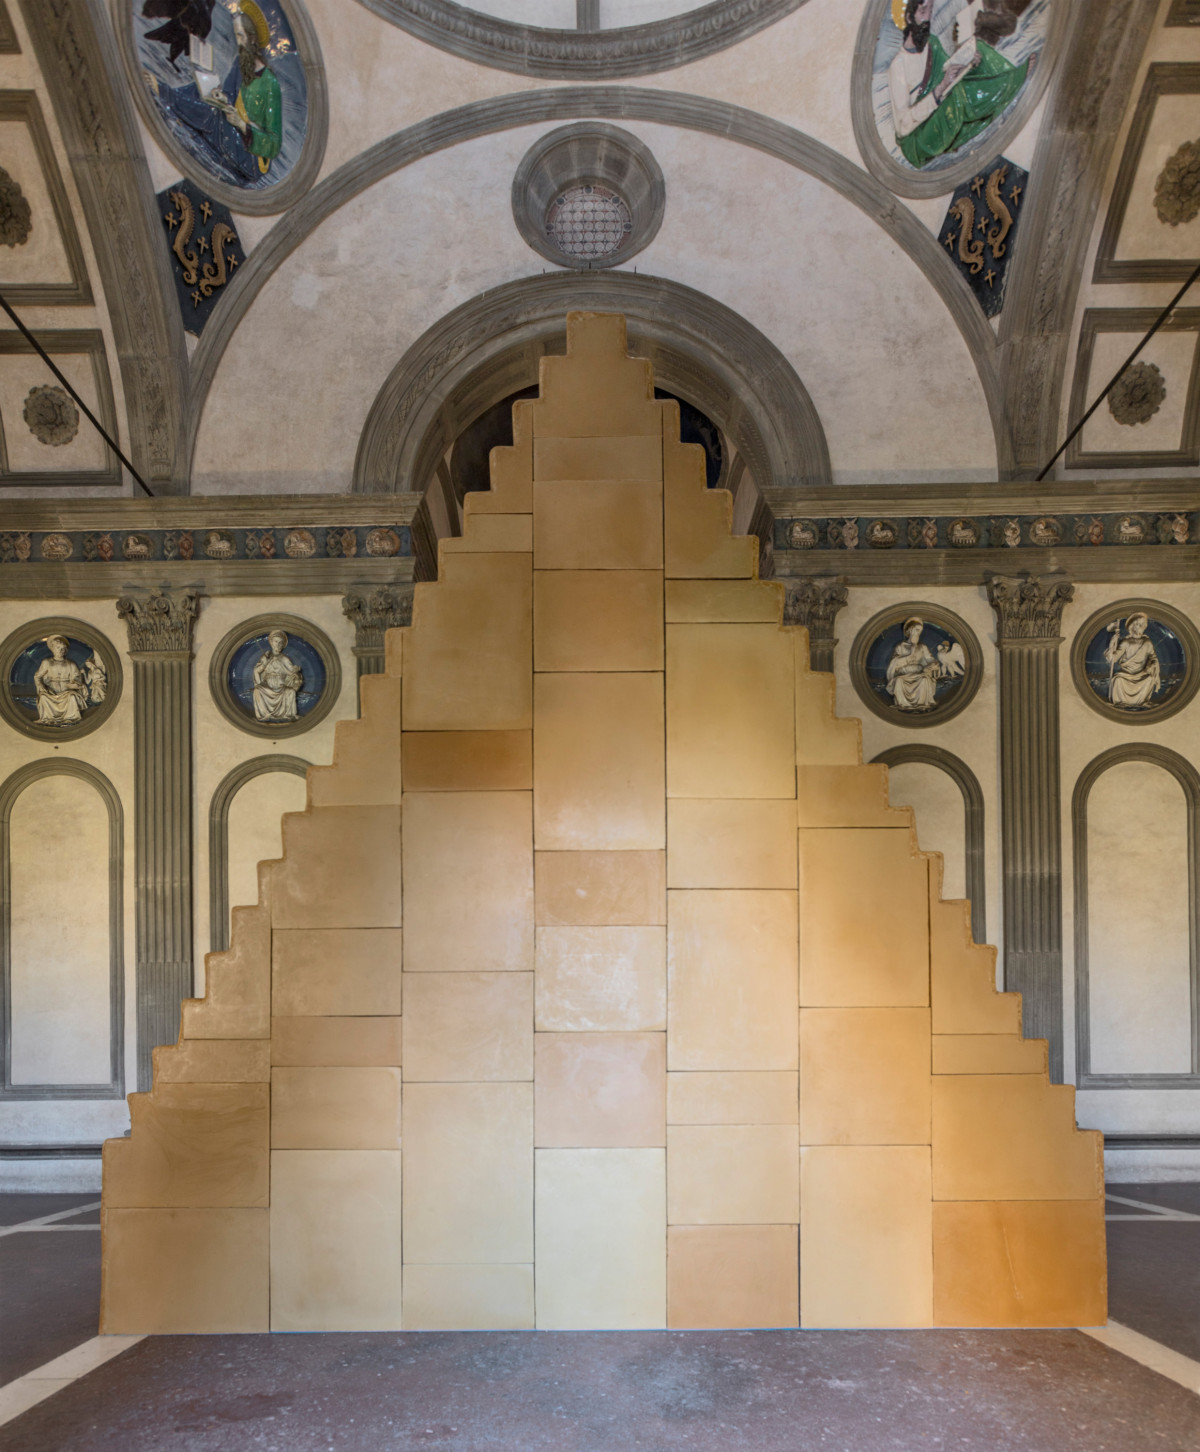 Wolfgang Laib, ‘Without Beginning and Without End , Cappella Pazzi, Complesso Monumentale di Santa Croce, Florence’, 2019, Beeswax